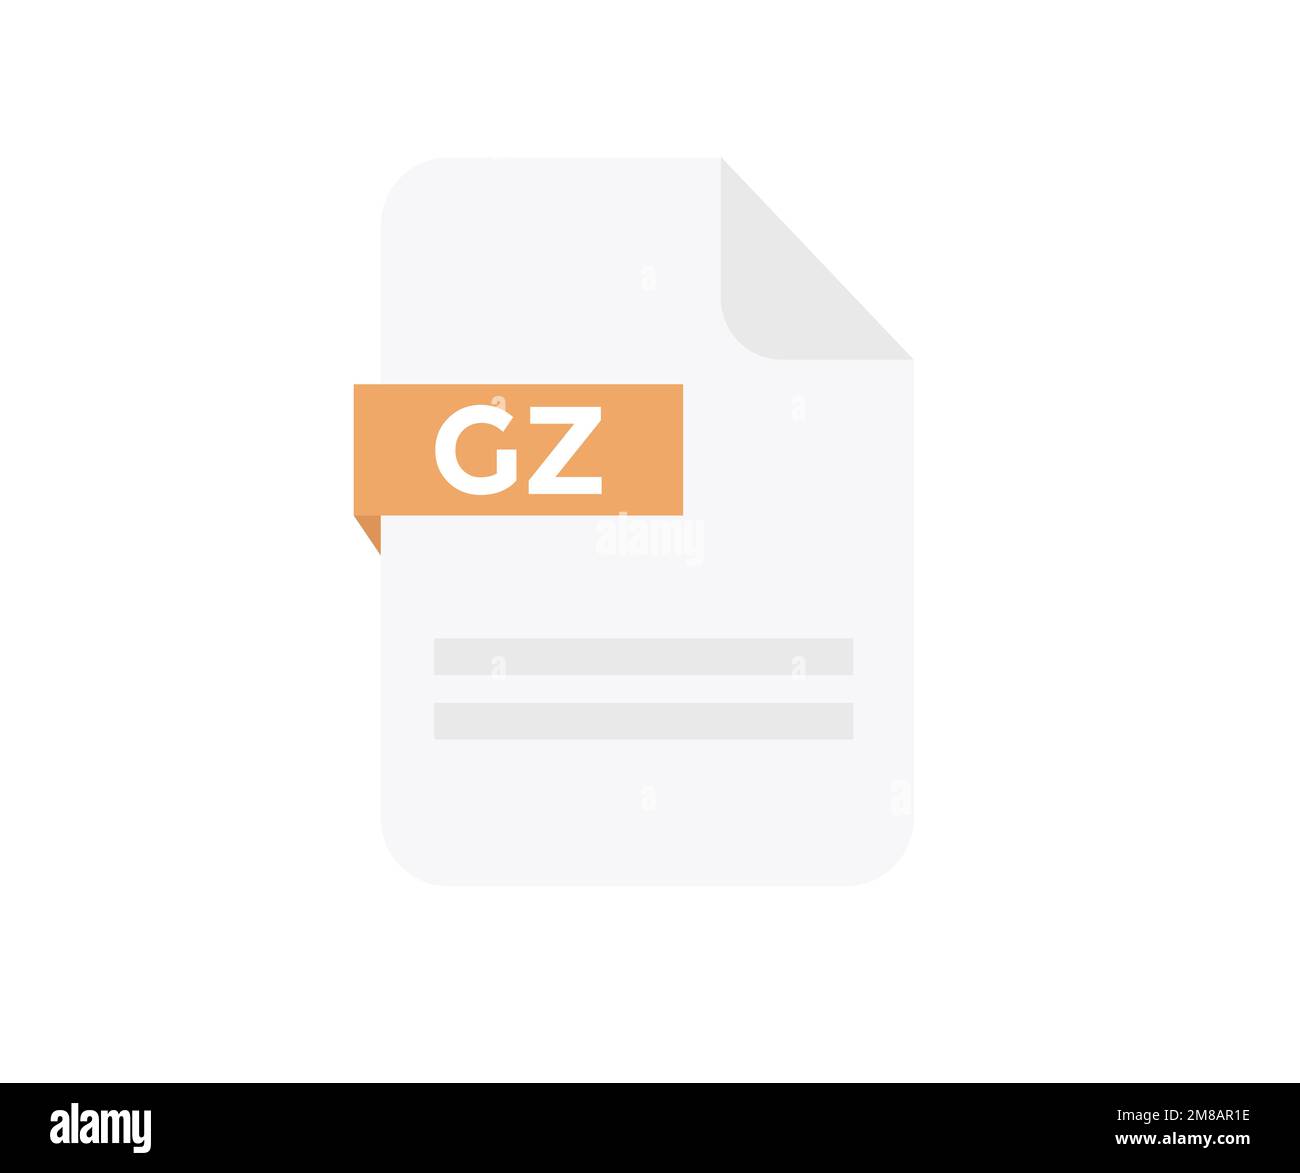 File format GZ logo design. Document file icon, internet, extension, sign, type, presentation, graphic, application. Element for applications. Stock Vector